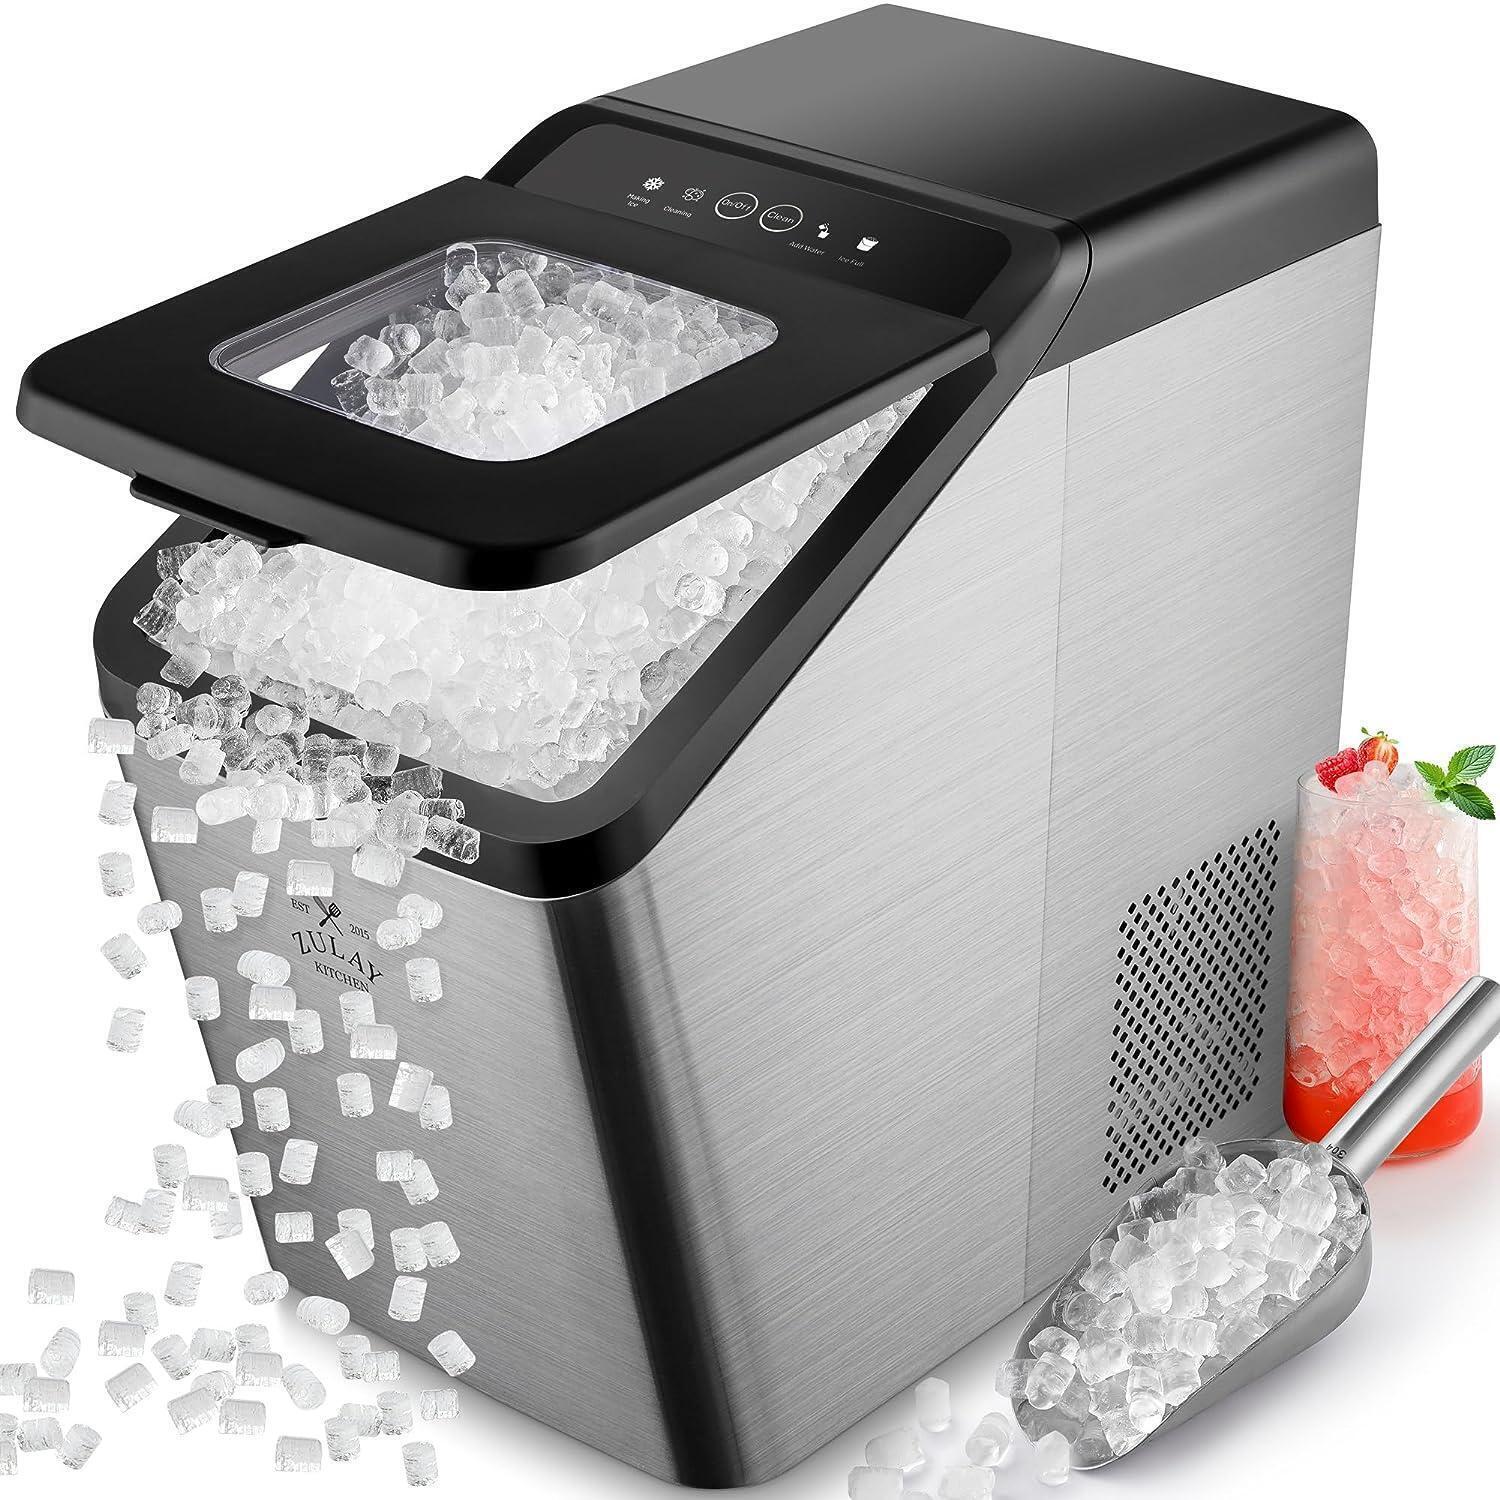 Zulay Kitchen Soft Ice Maker with Water Line Hook Up - Pebble Ice Makers Countertop Stainless Steel